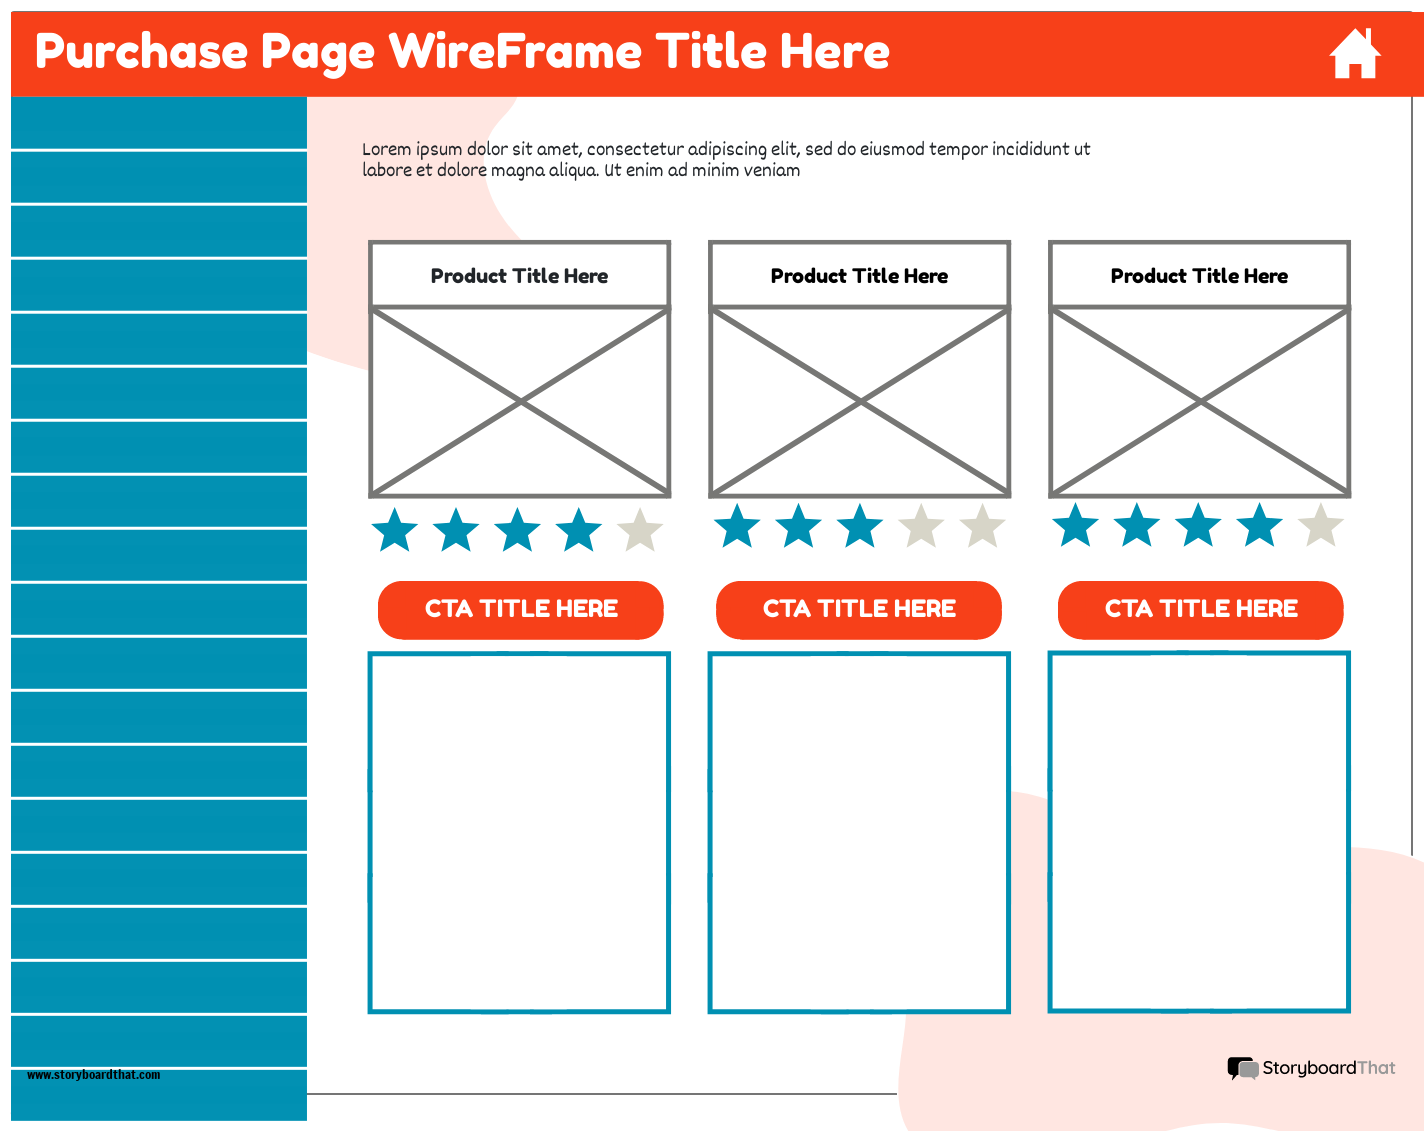 Corporate Purchase Wireframe Template 3